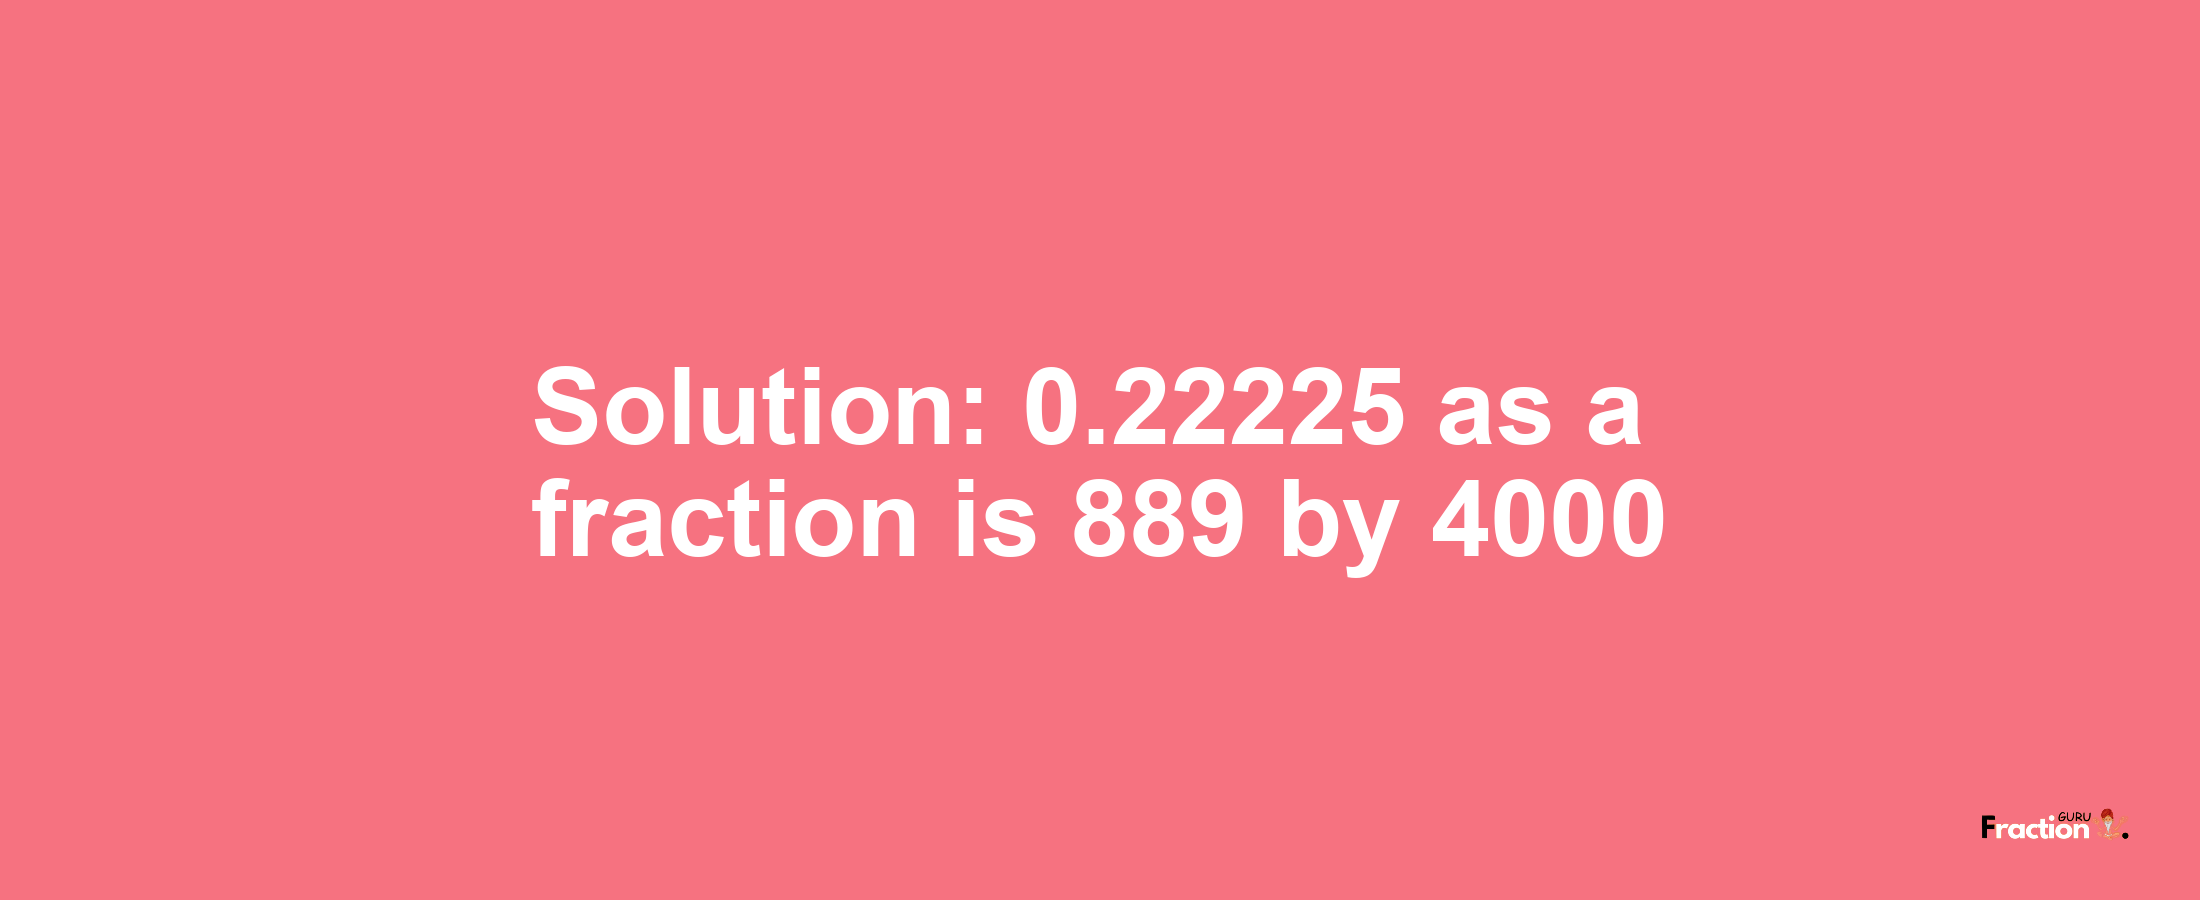 Solution:0.22225 as a fraction is 889/4000